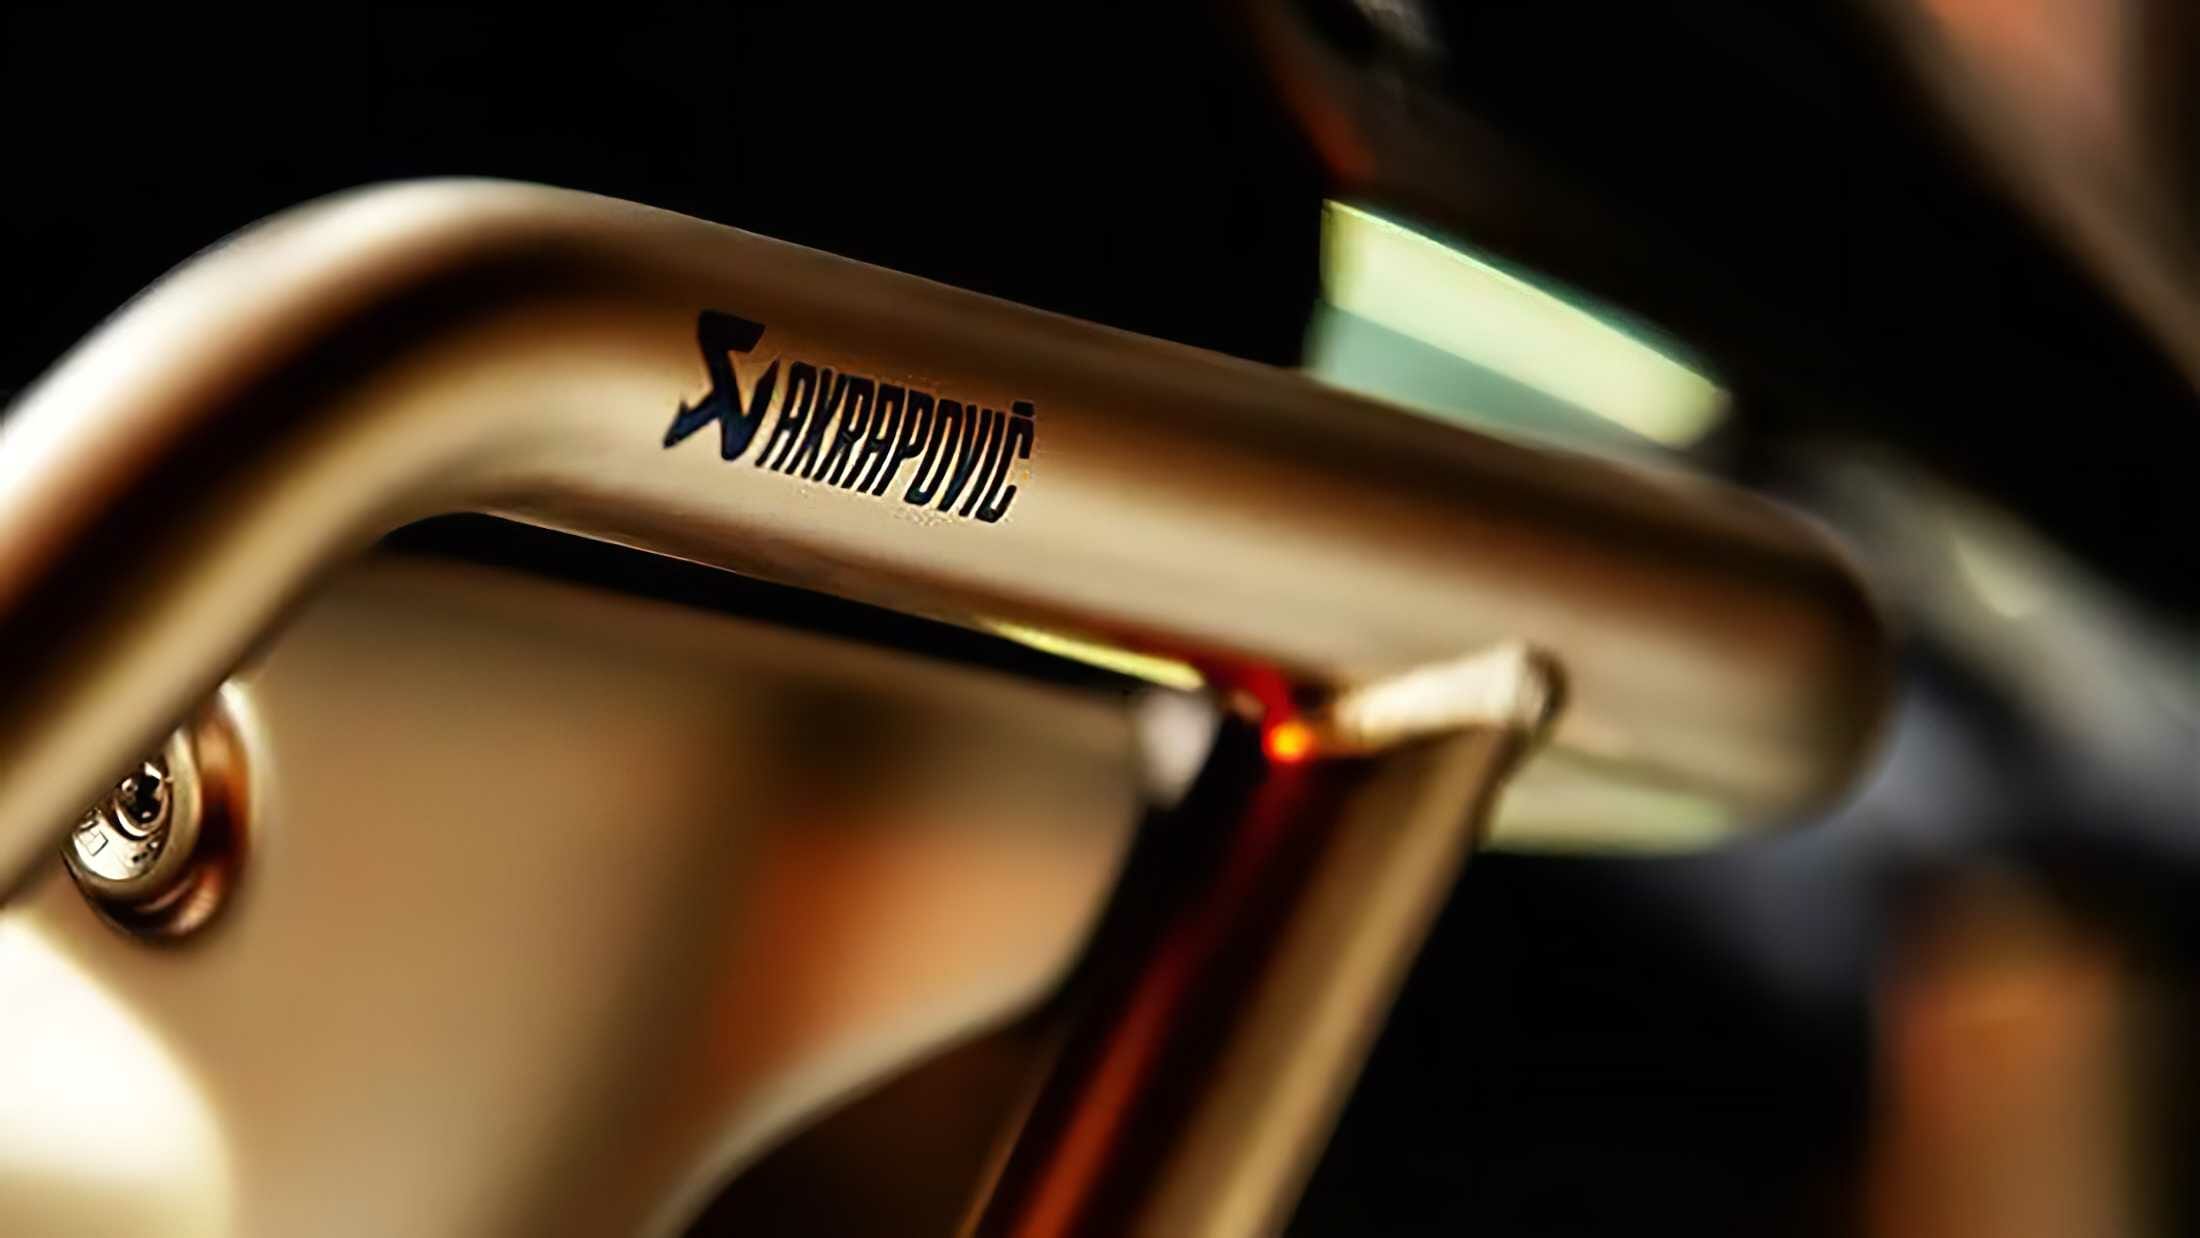 Akrapovic now also builds crash bars
- also in the MOTORCYCLES.NEWS APP